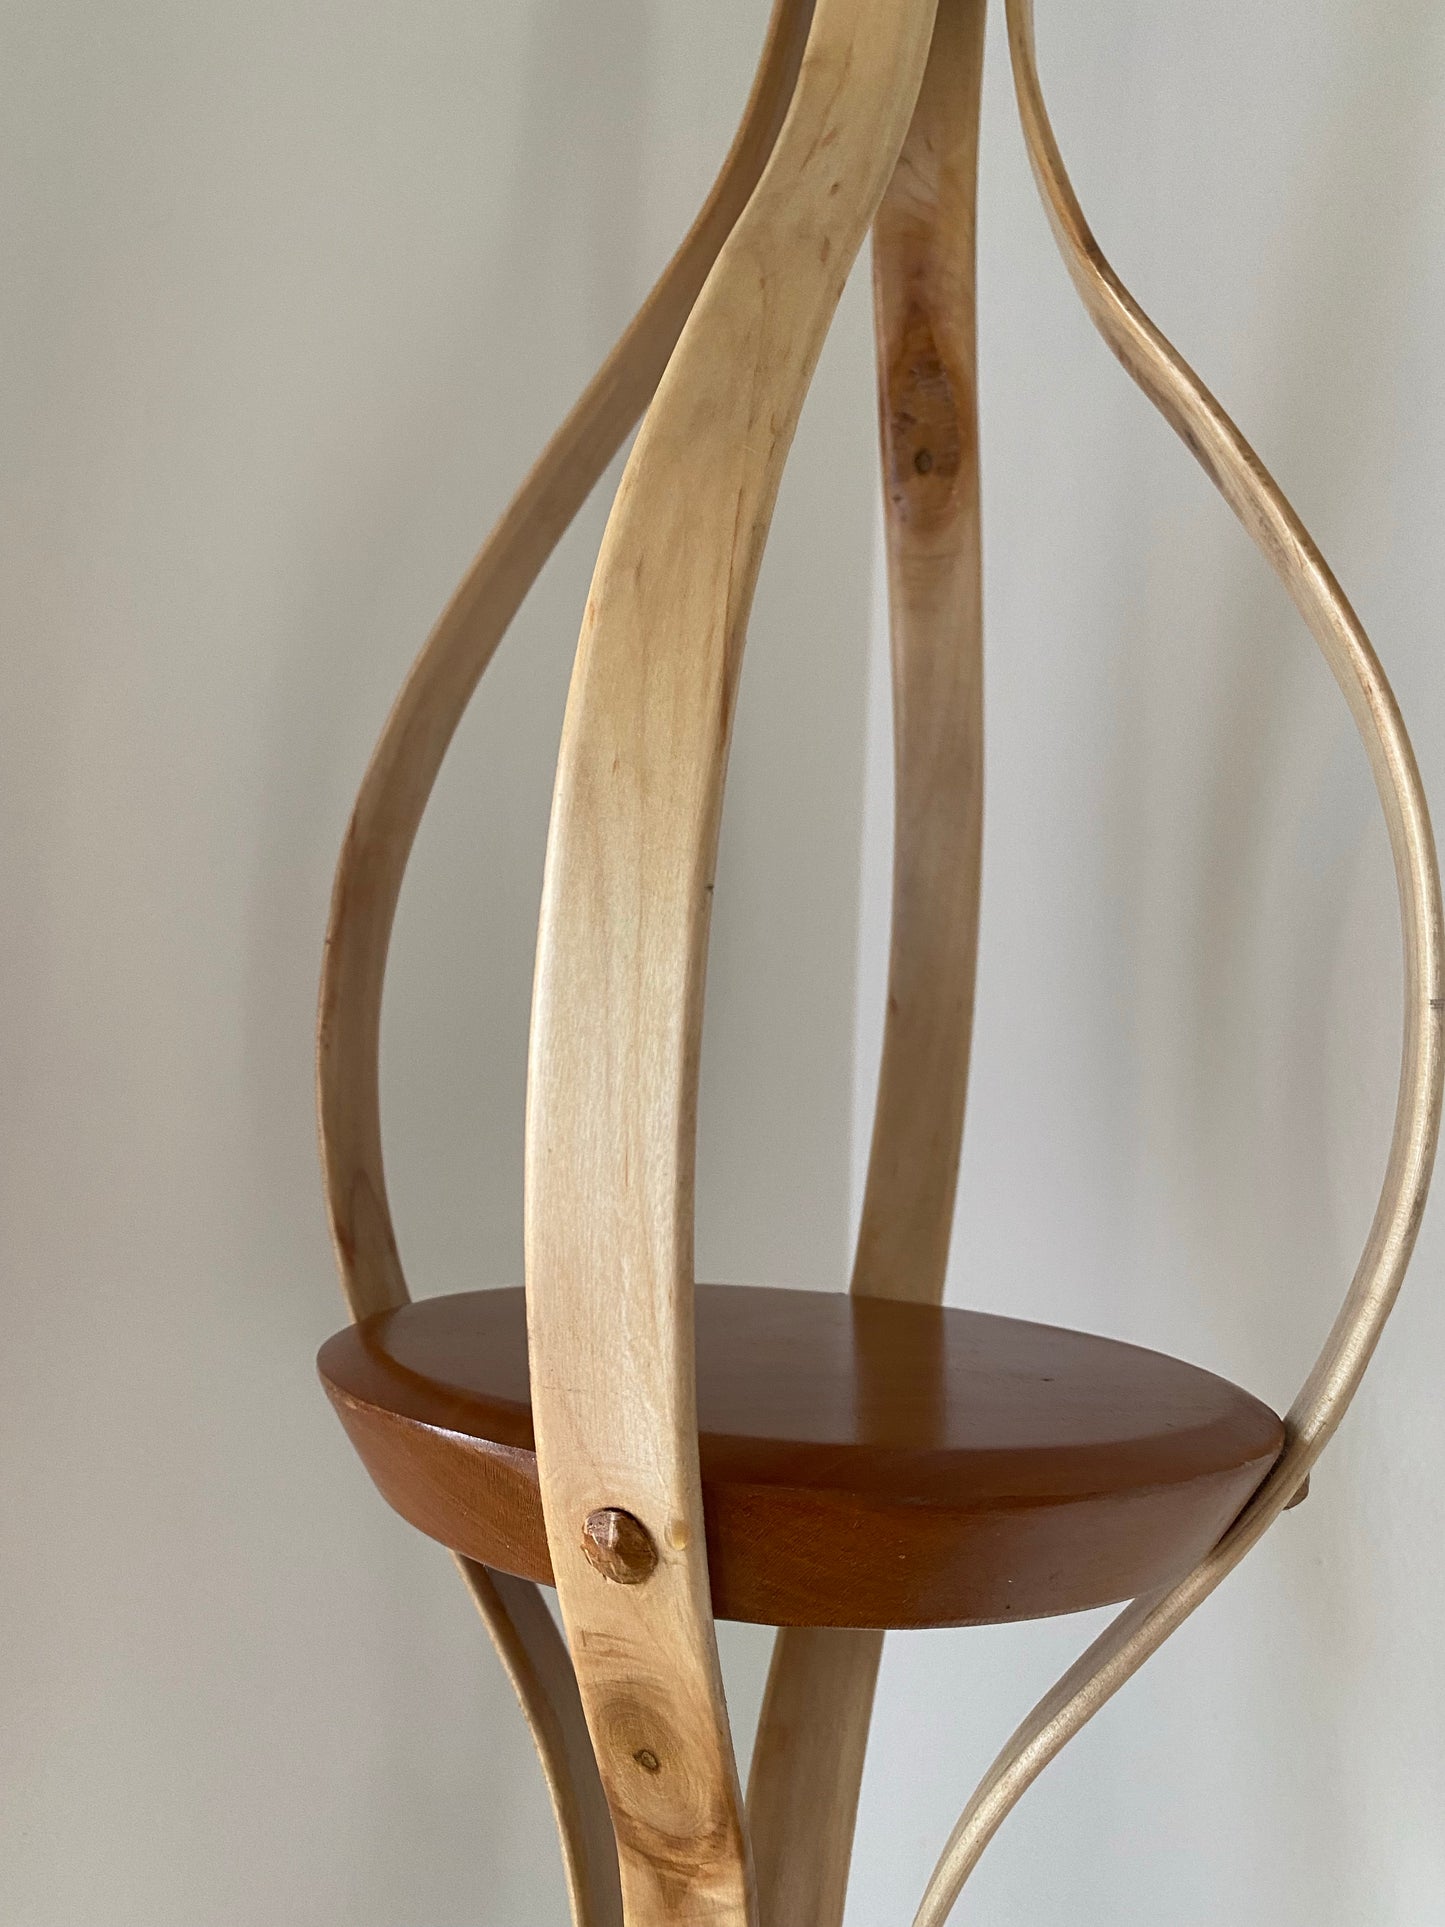 Wooden Plant Hanger | Maple and Cherry